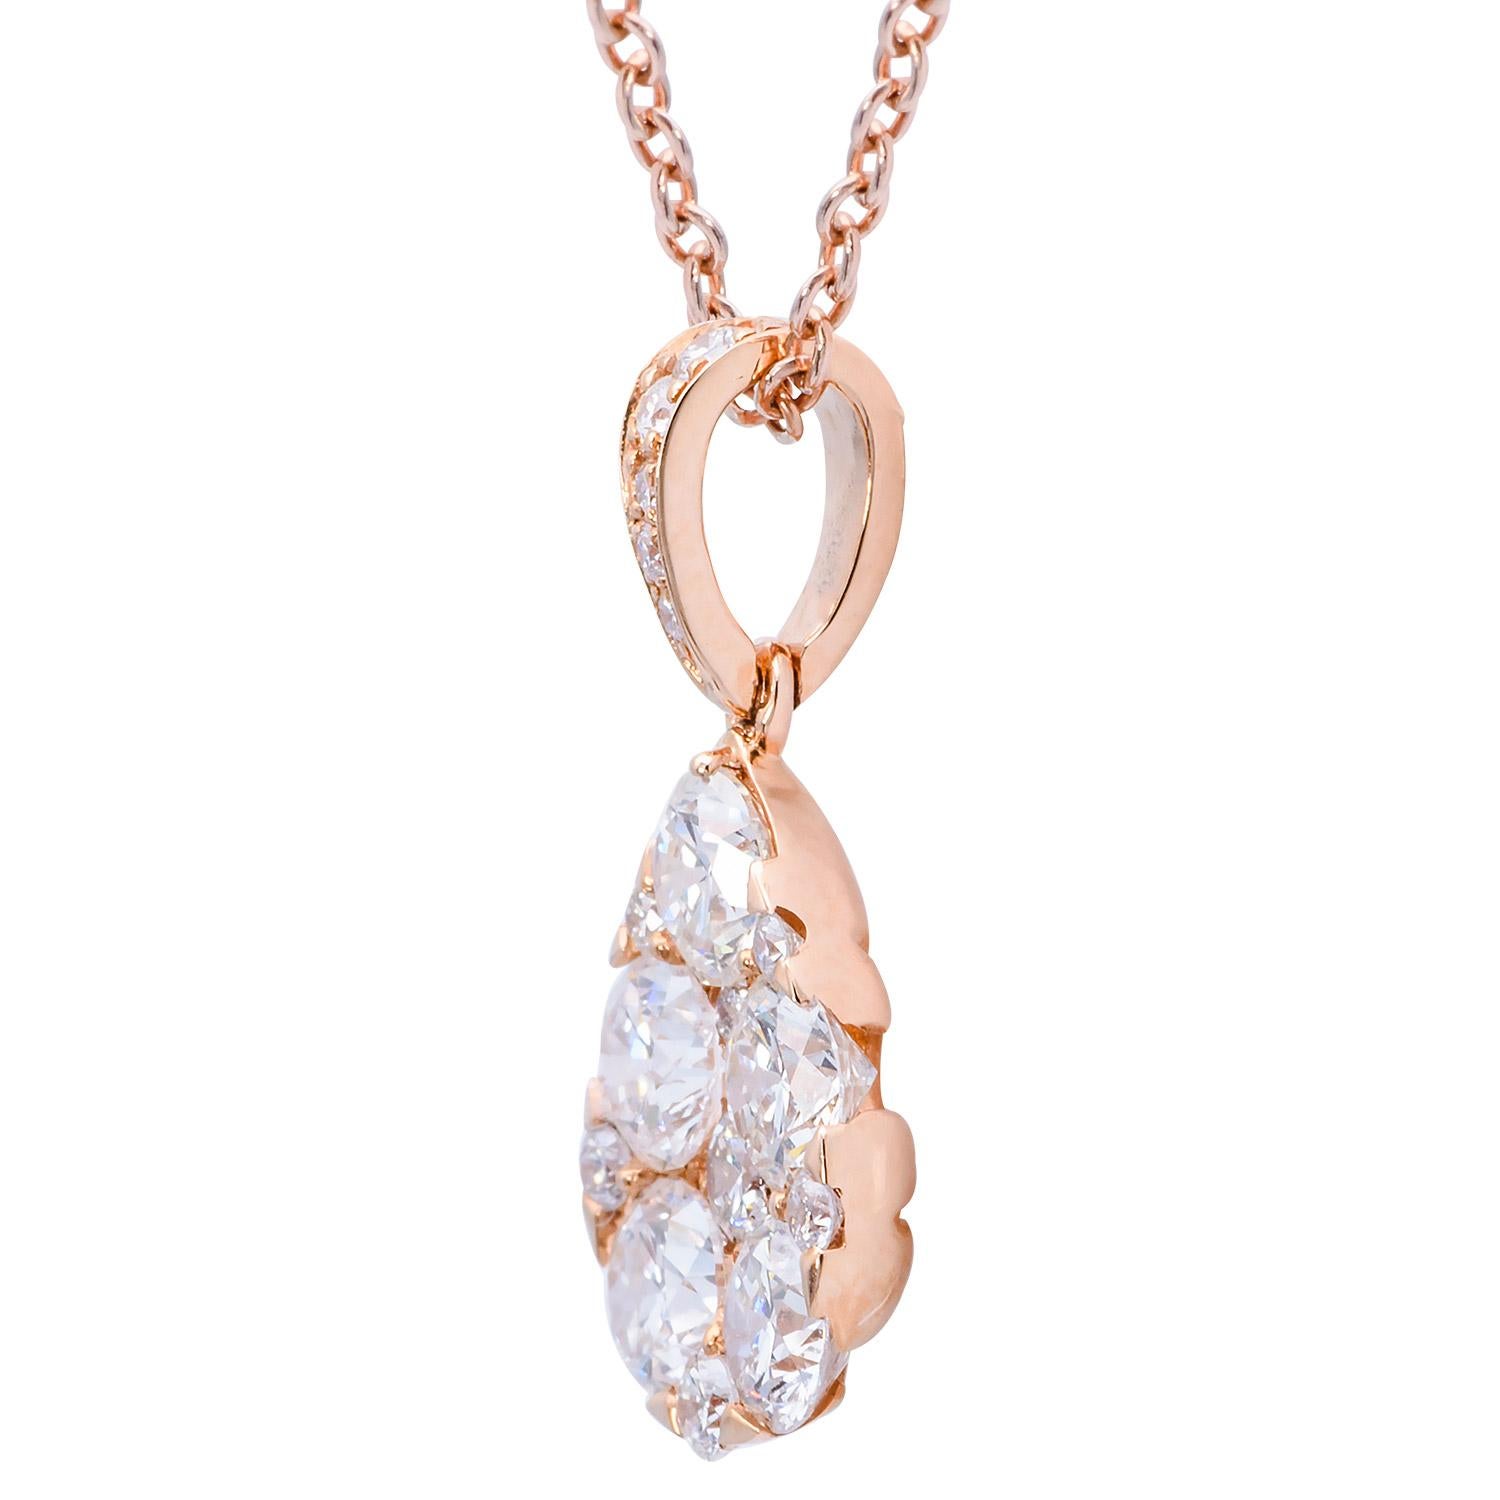 This stunning diamond pendant is made from 17 VS2, G color diamonds totaling 1.02 carats which form a tear drop shape hung from a diamond-covered bail. The diamonds are set in 1.2 grams of 18 karat rose gold. This beautiful pendant is hung from an